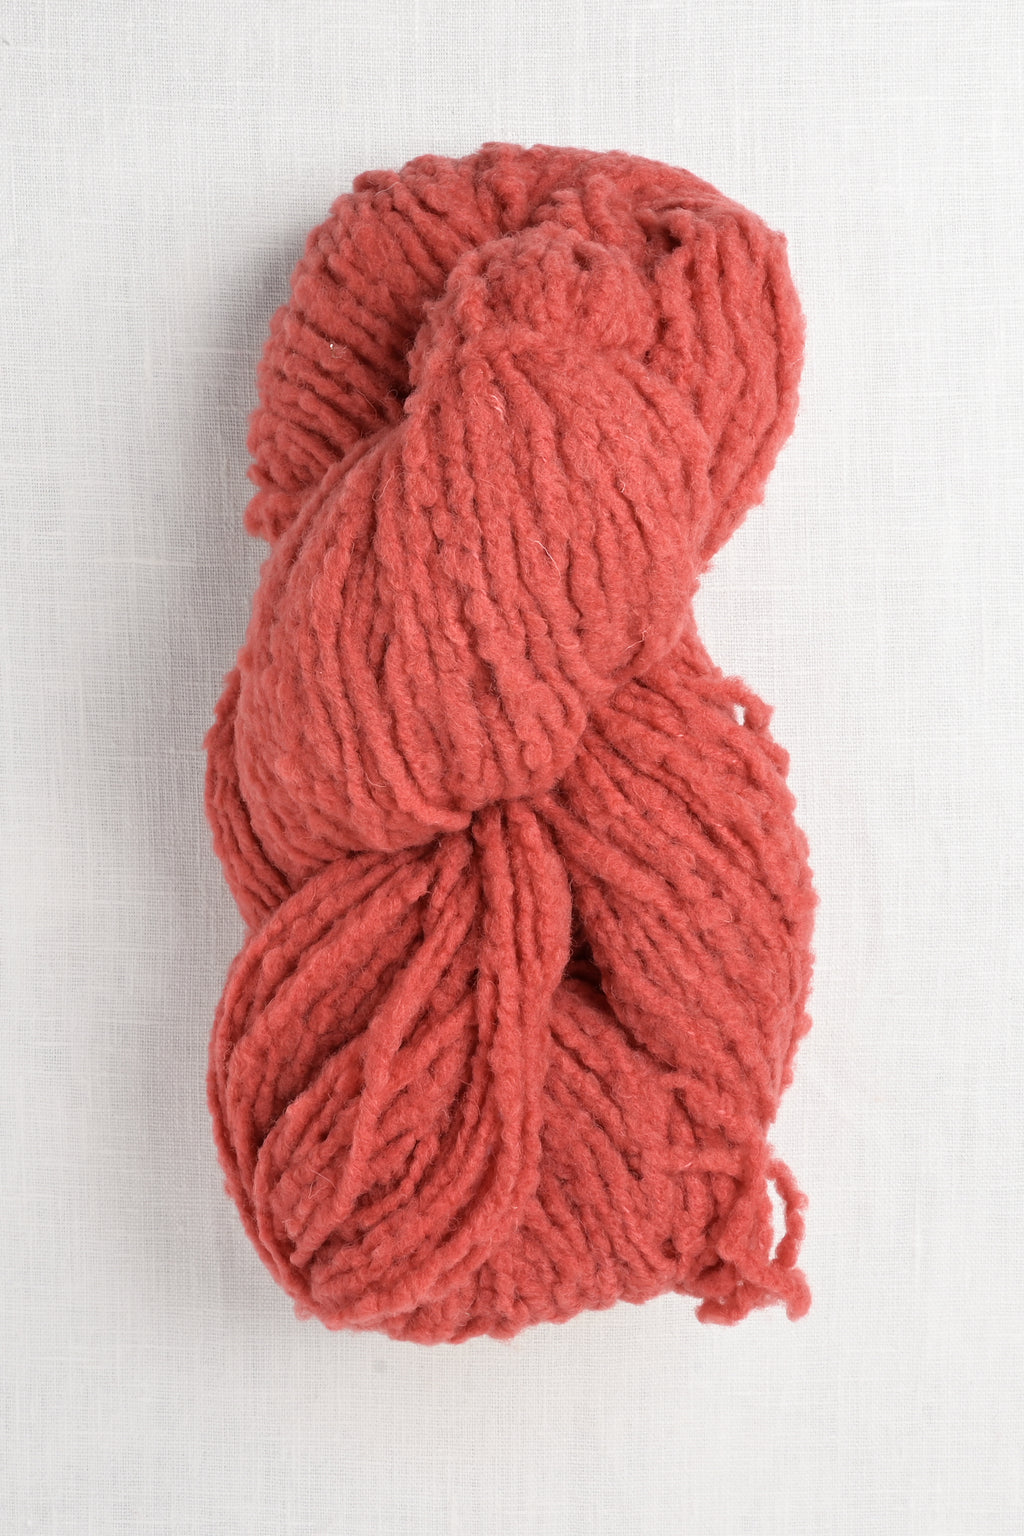 Knit Collage Serenity Burnt Red